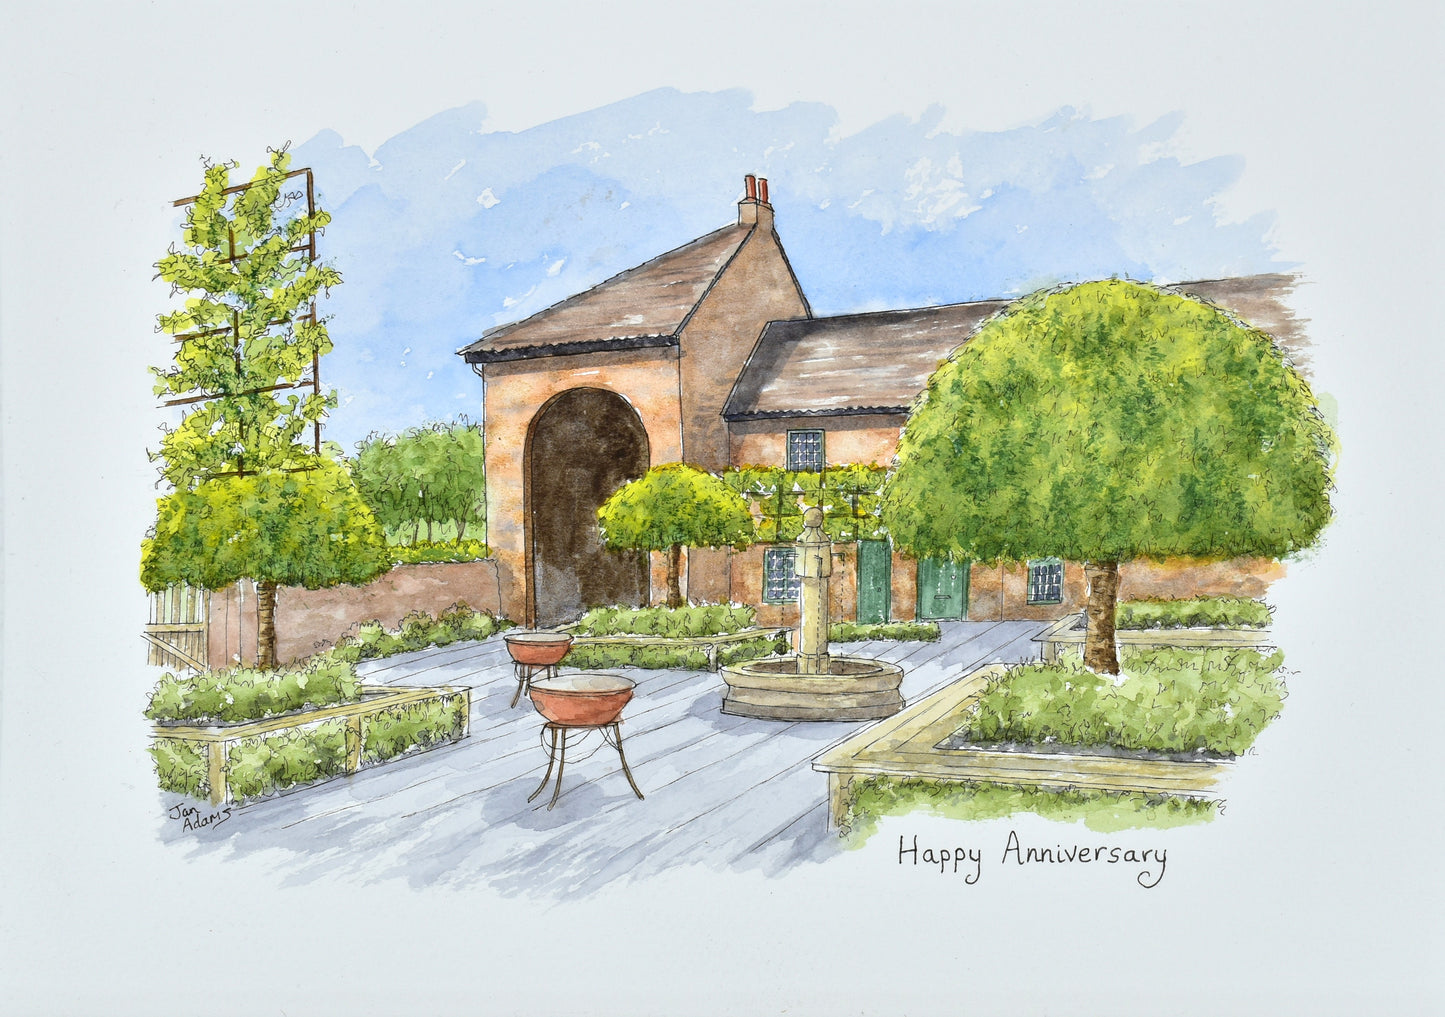 Hazel Gap Barn courtyard with barbeques